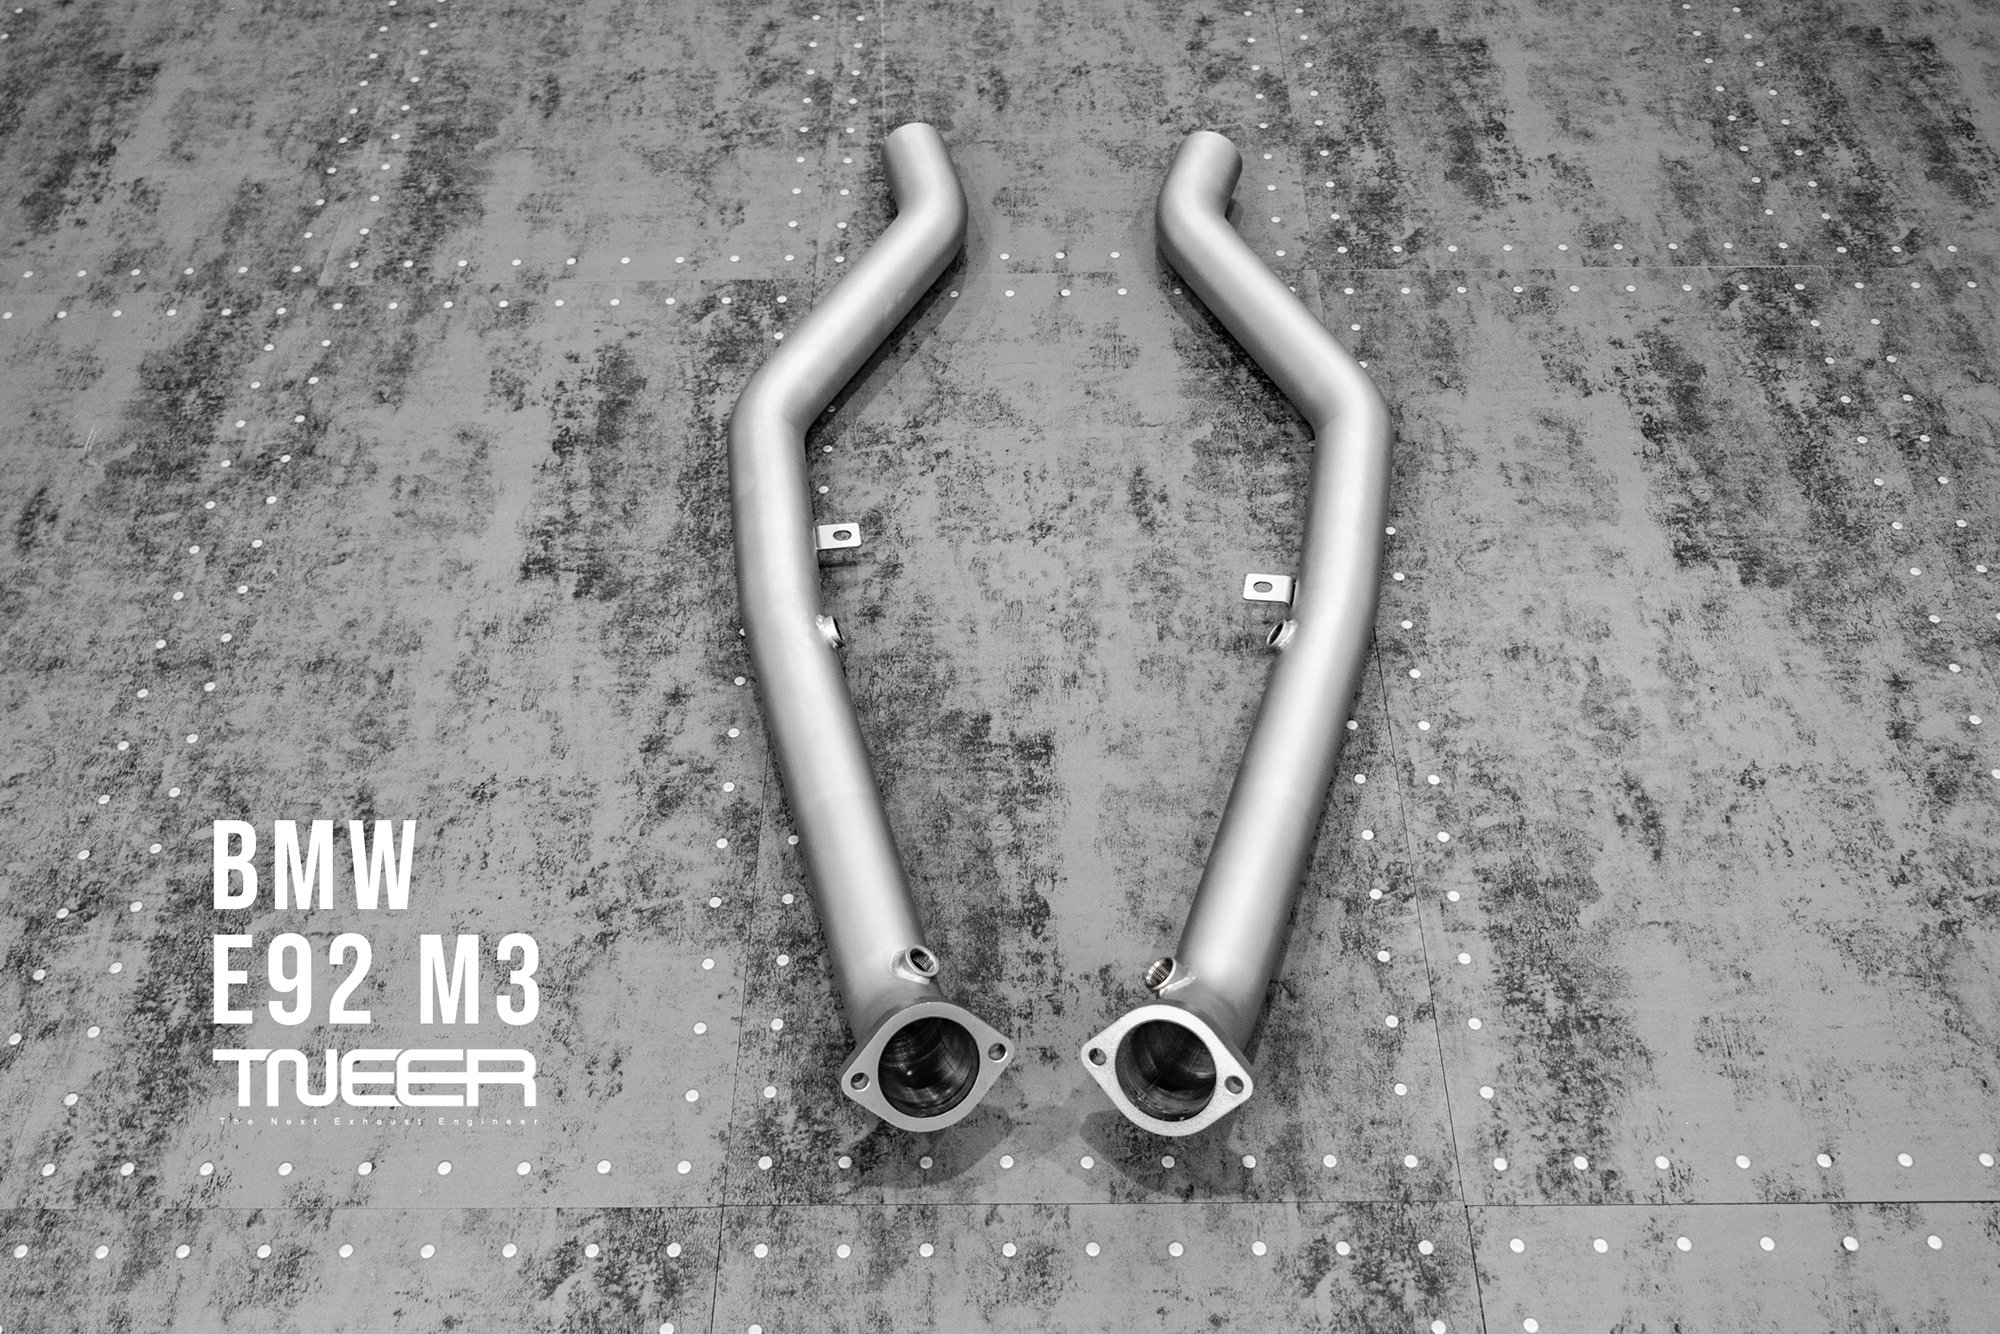 BMW E90 M3 TNEER Exhaust System with TACS and Quad Silver Tips